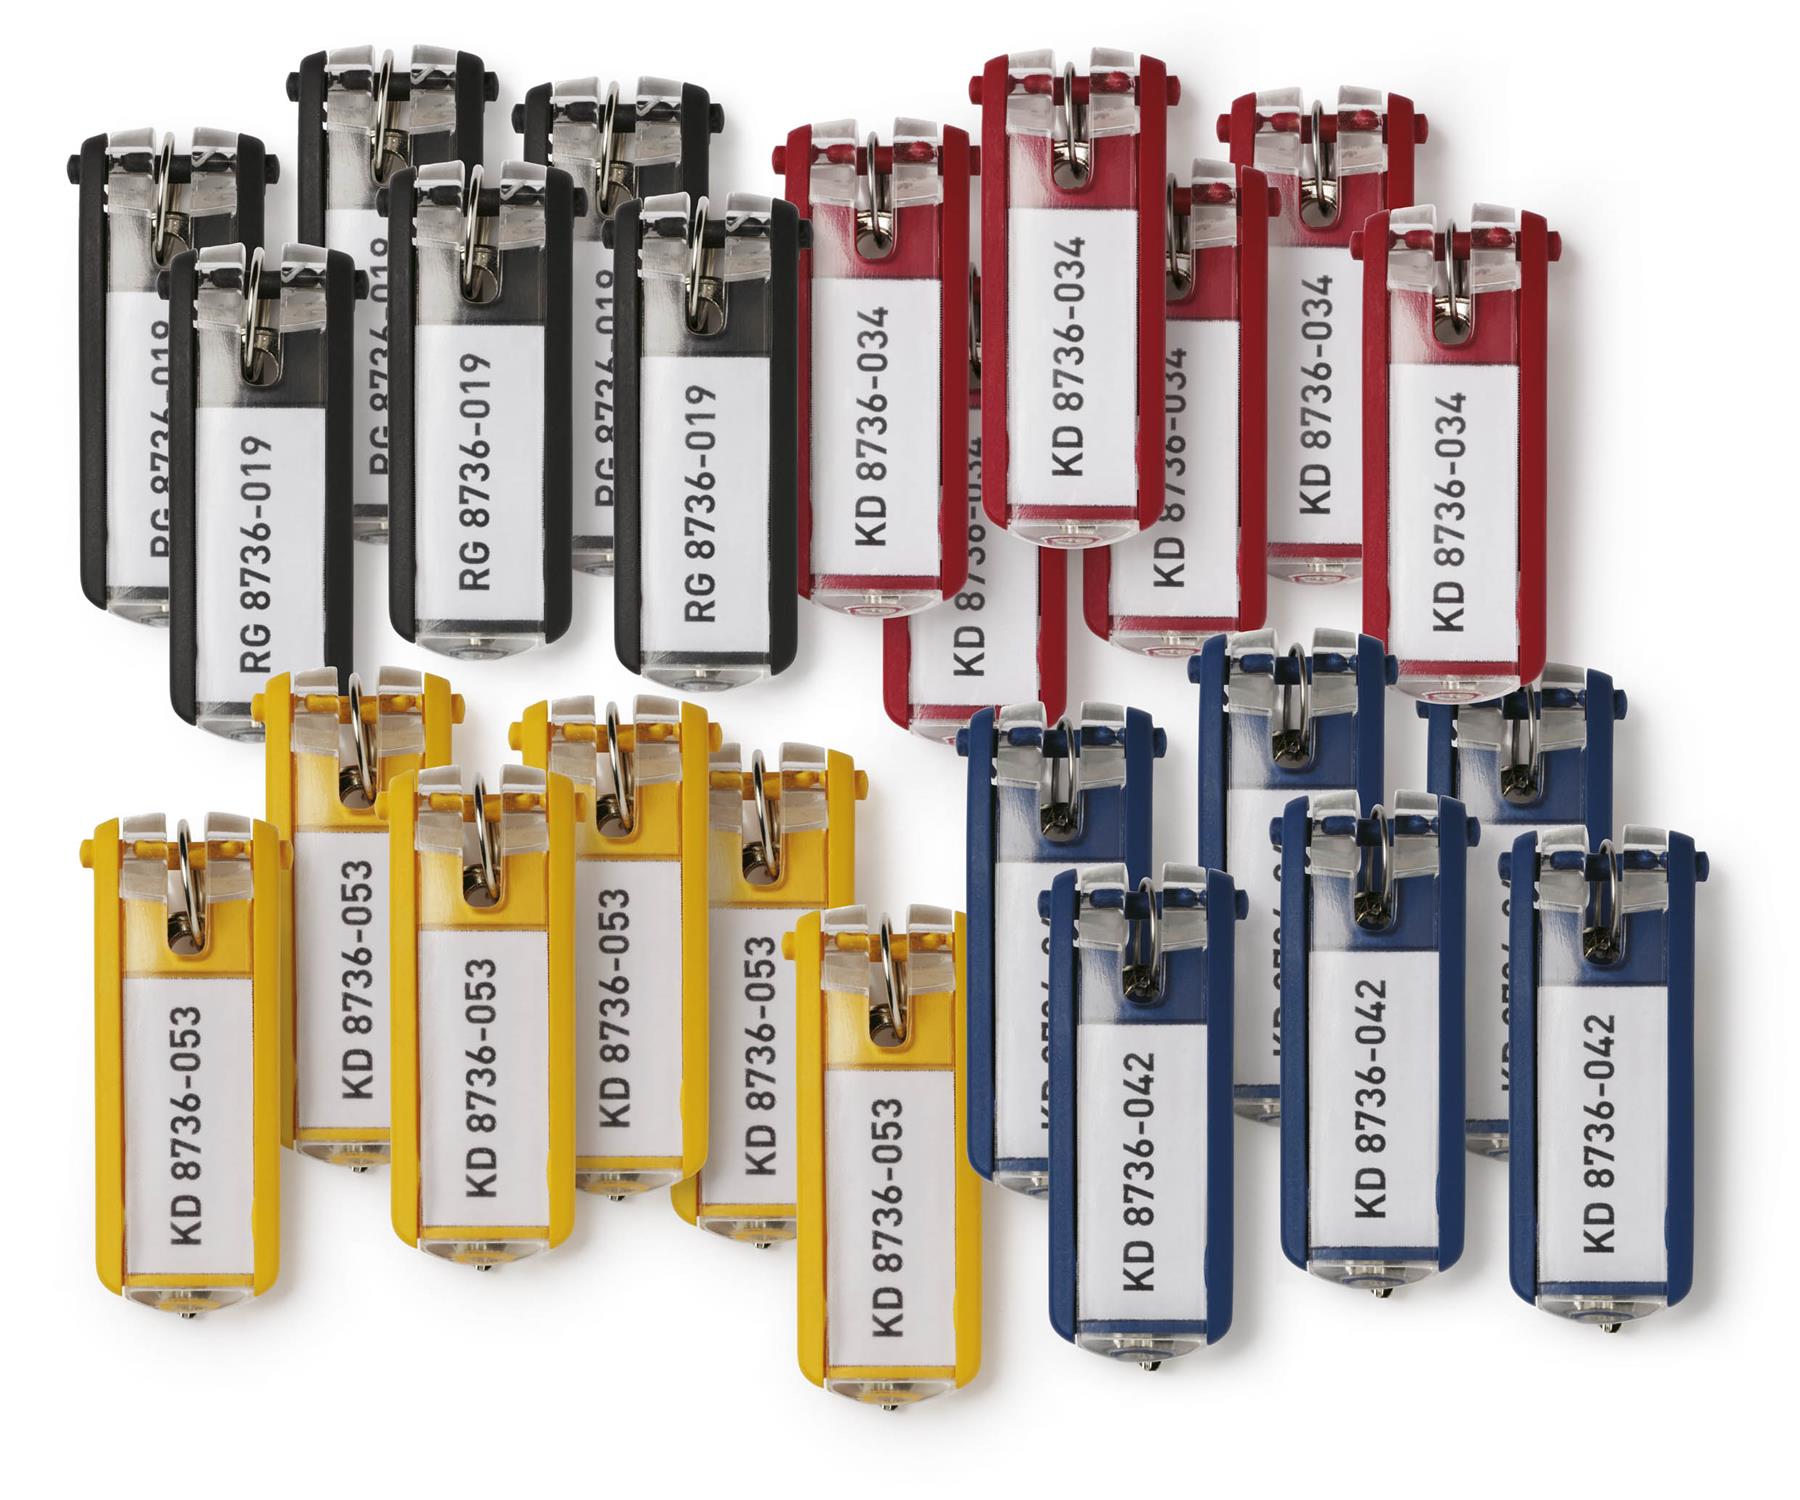 Durable Key Clips Organisational Label Hooks | 24 Pack | Assorted